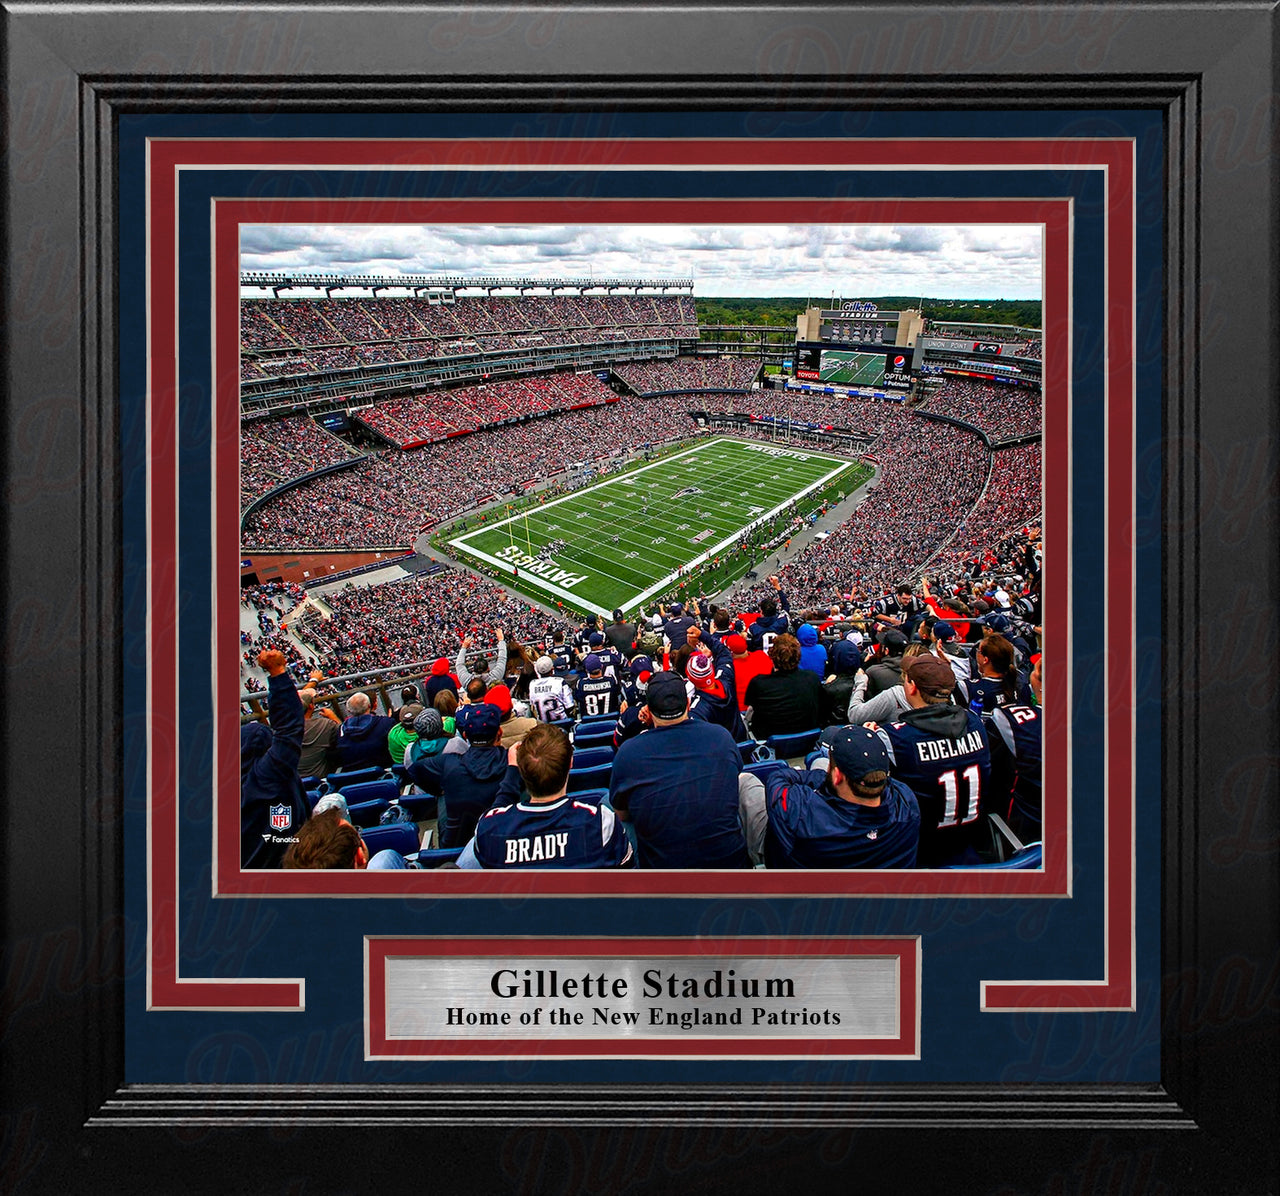 New England Patriots Gillette Stadium In the Crowd 8" x 10" Framed Football Photo - Dynasty Sports & Framing 